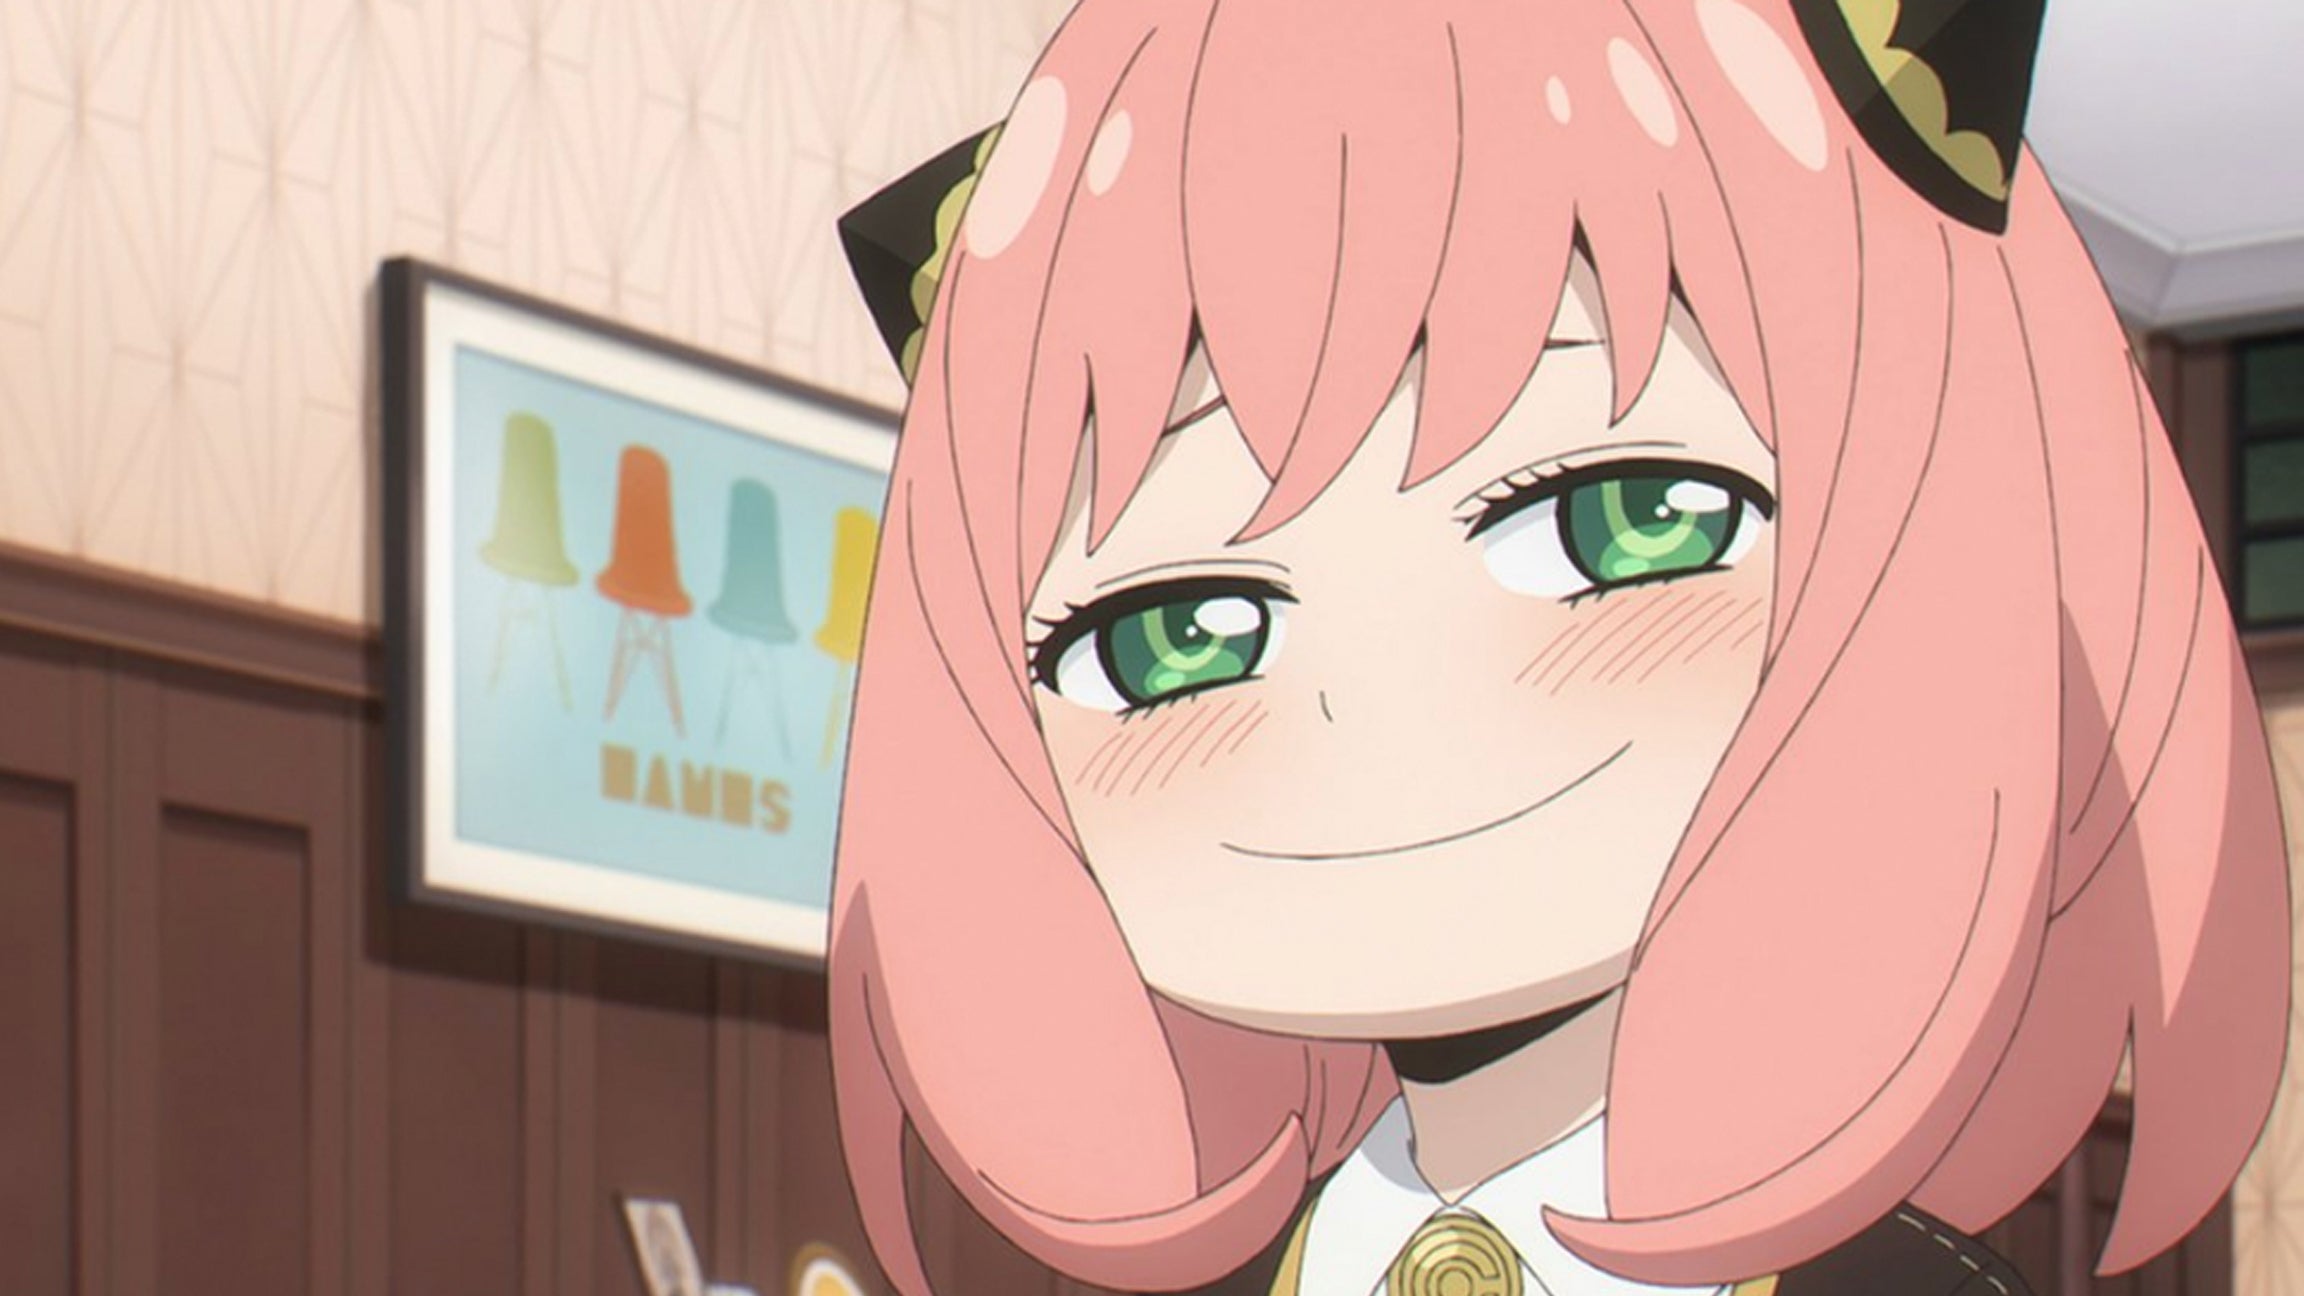 Image showing Spy x Family character Anya smiling in the anime.